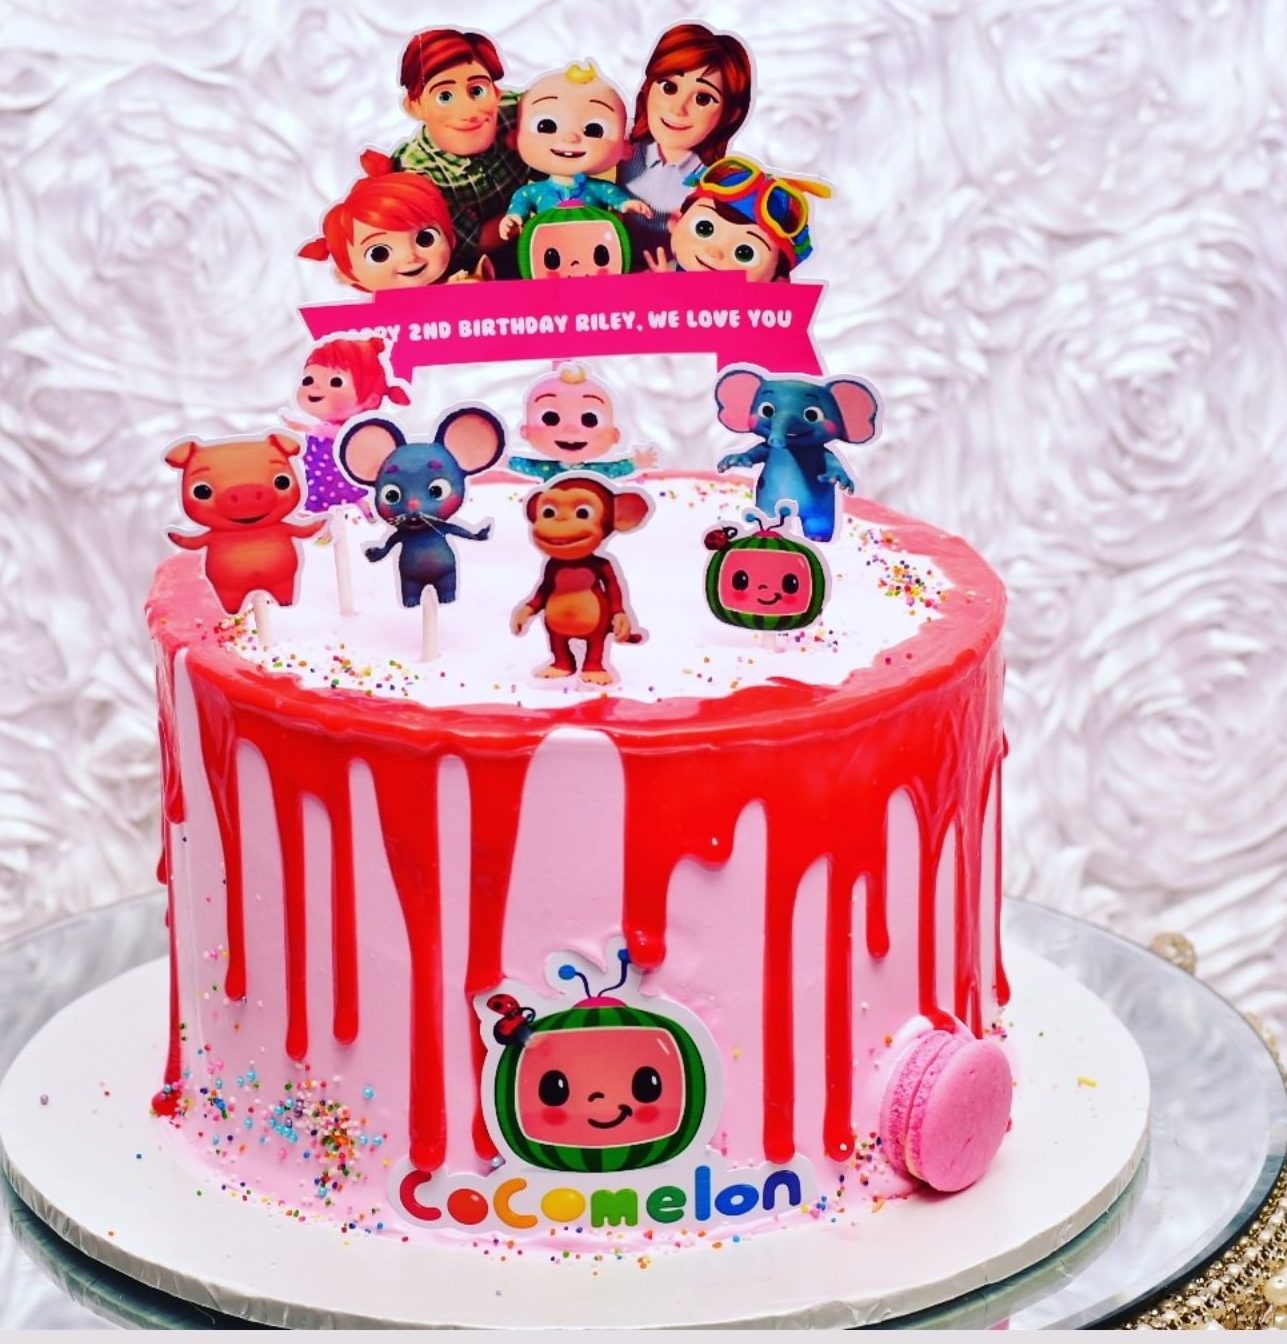 Outstanding Cocomelon Birthday Cake For Your Girls Birthday